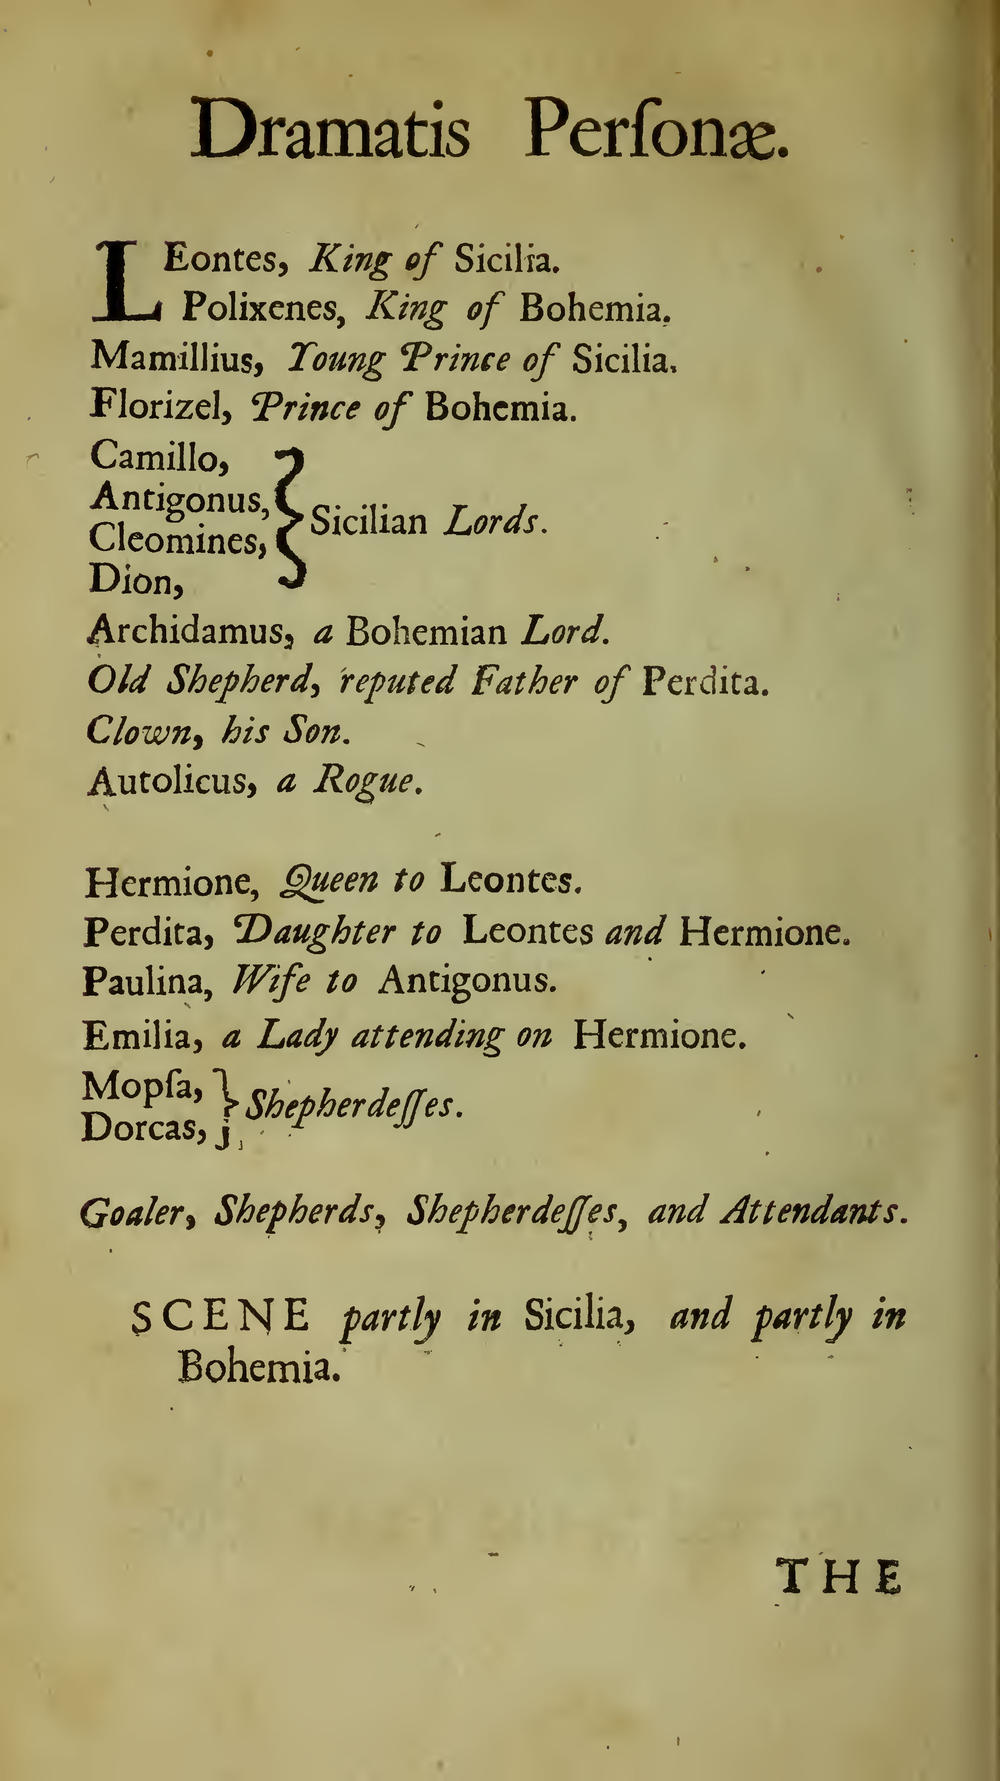 Image of page 440